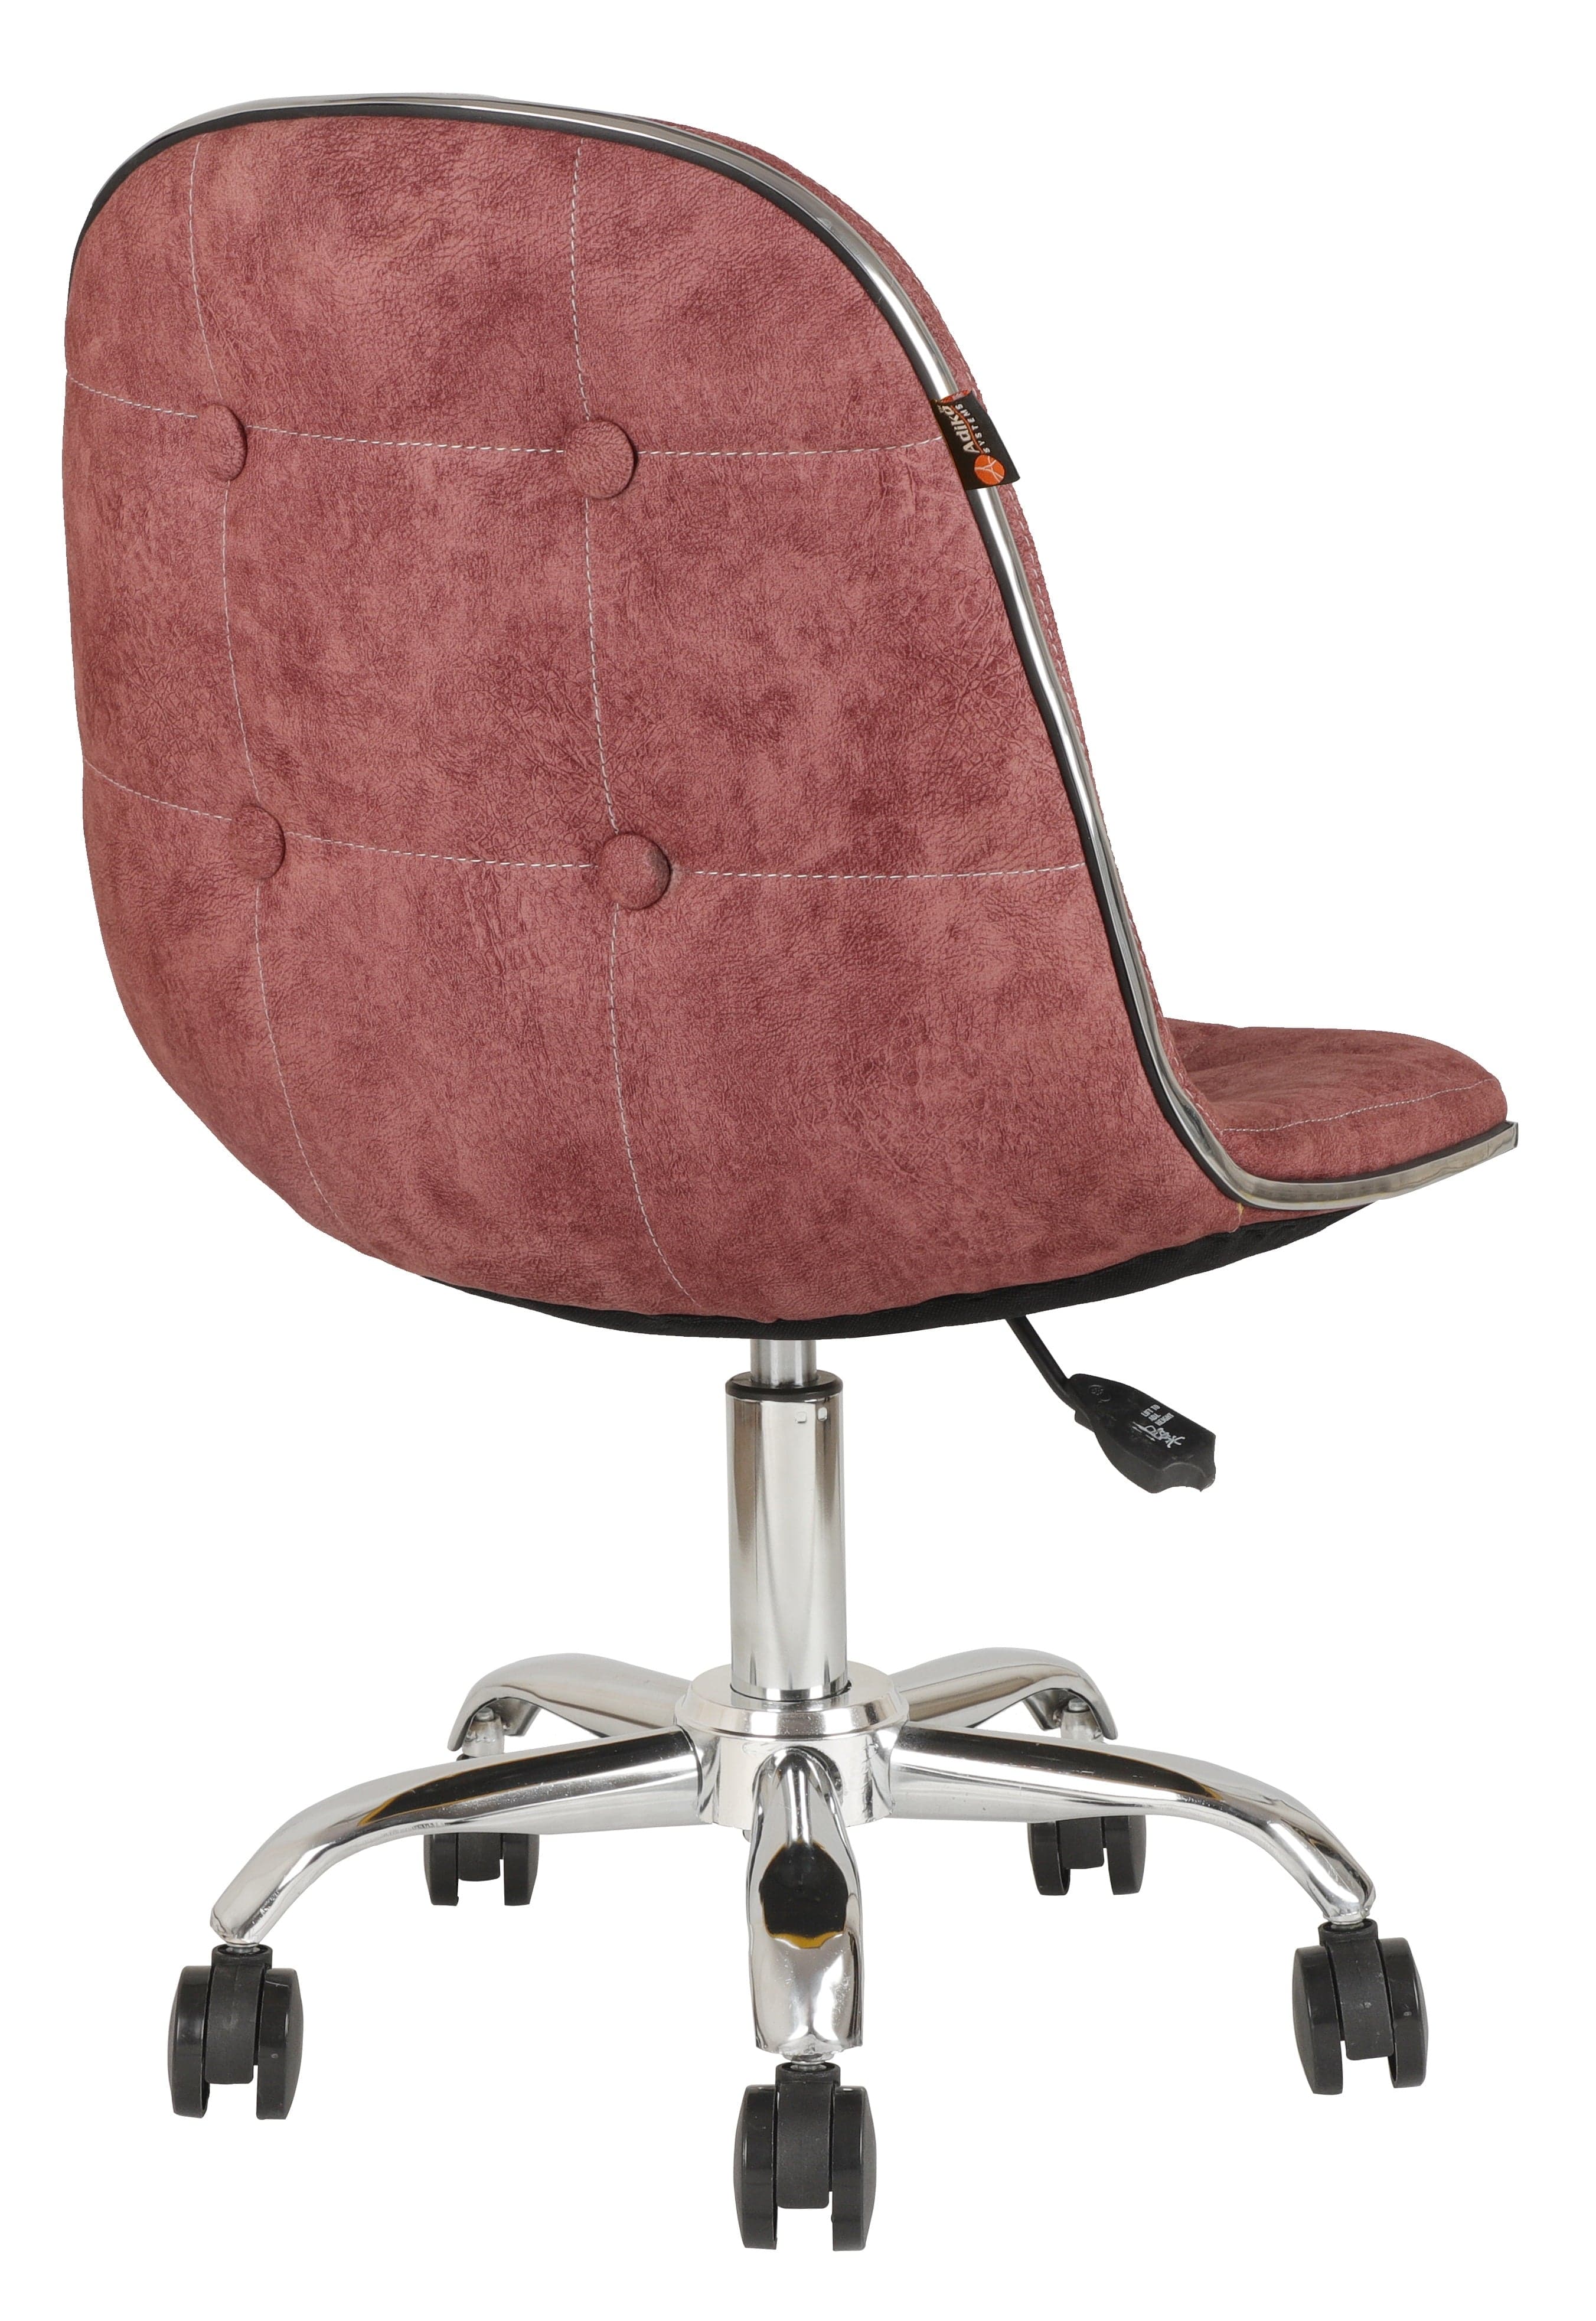 Adiko Lounge Chair in Cherry Color